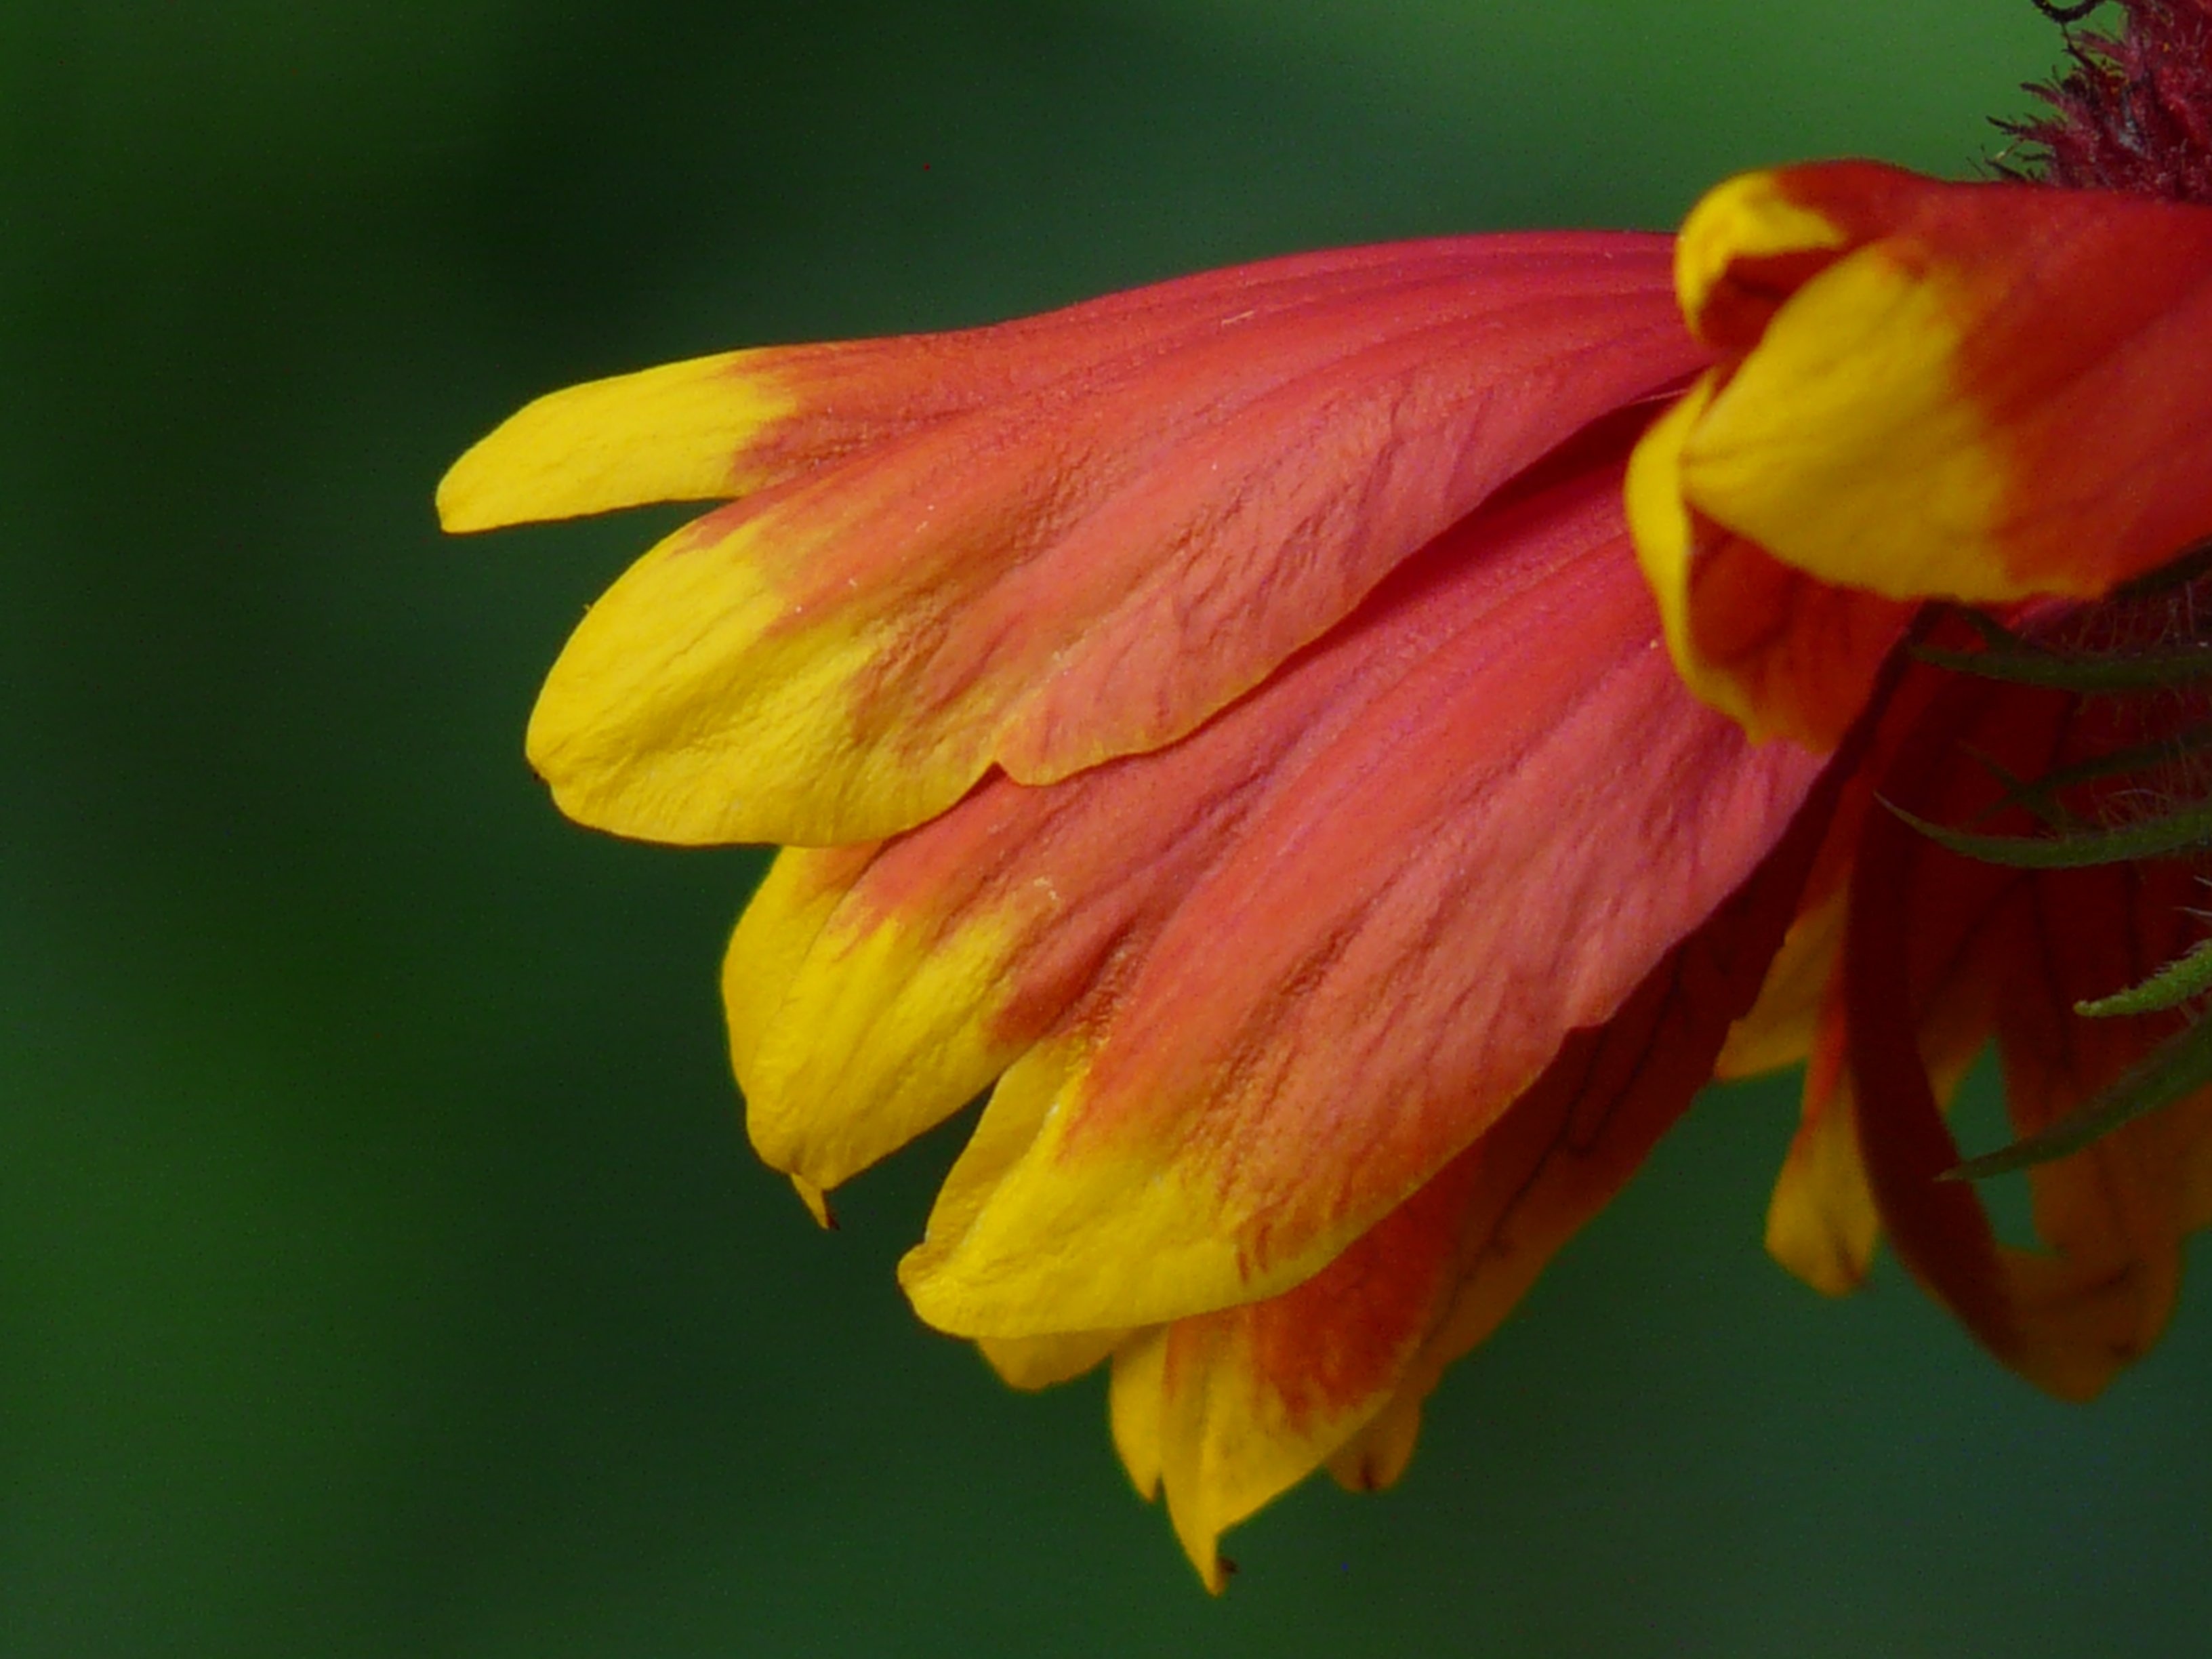 red and yellow flower with petals